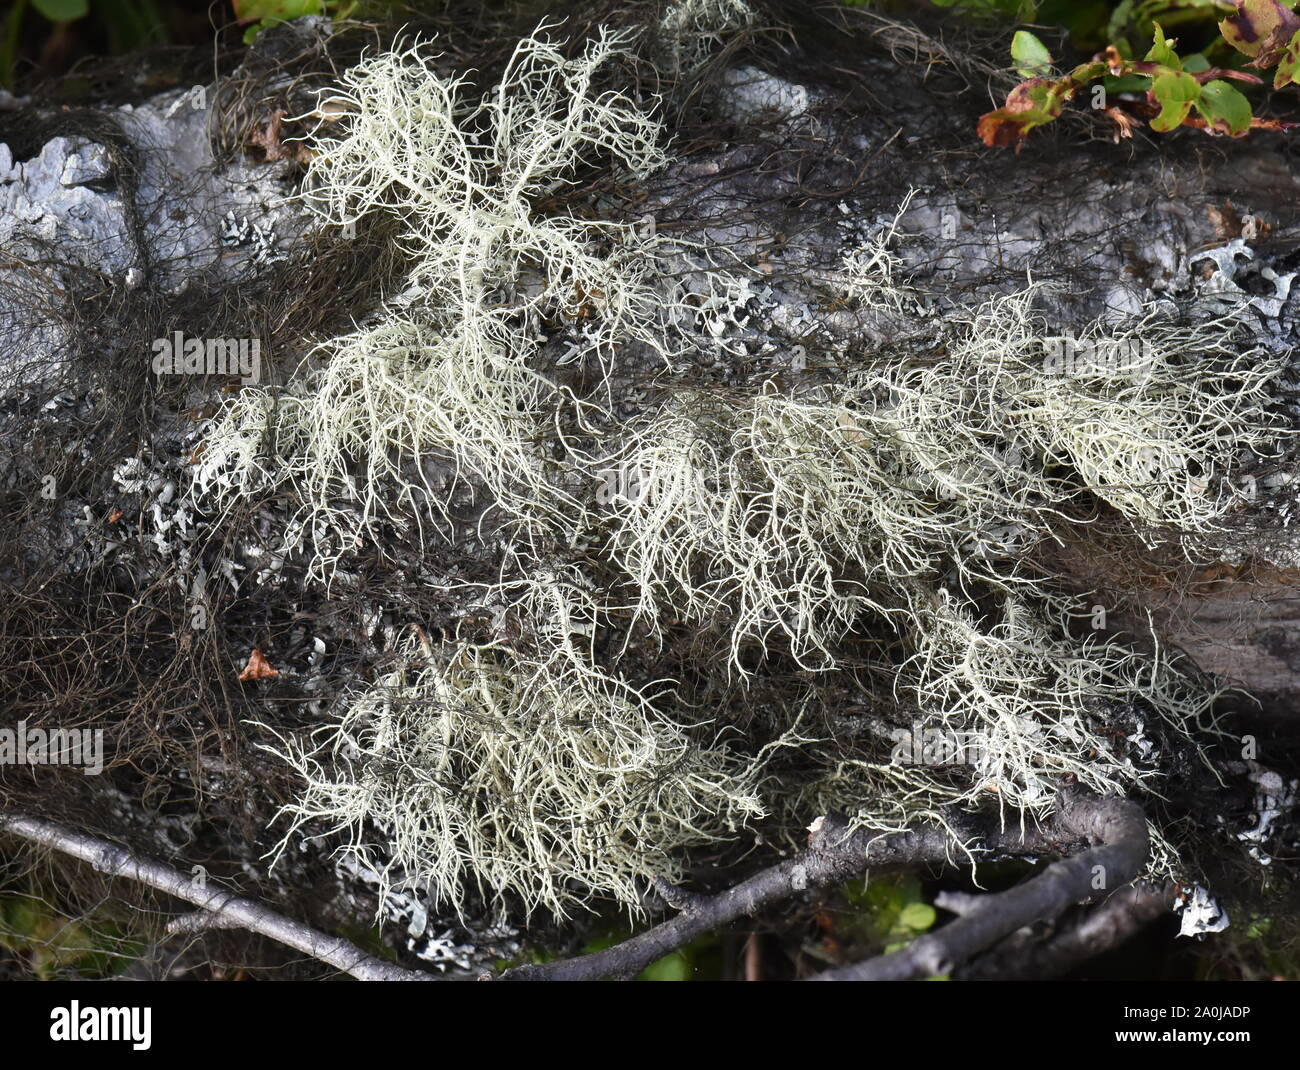 Two different lichen Bryoria and Usnea growing on the same tree trunk Stock Photo